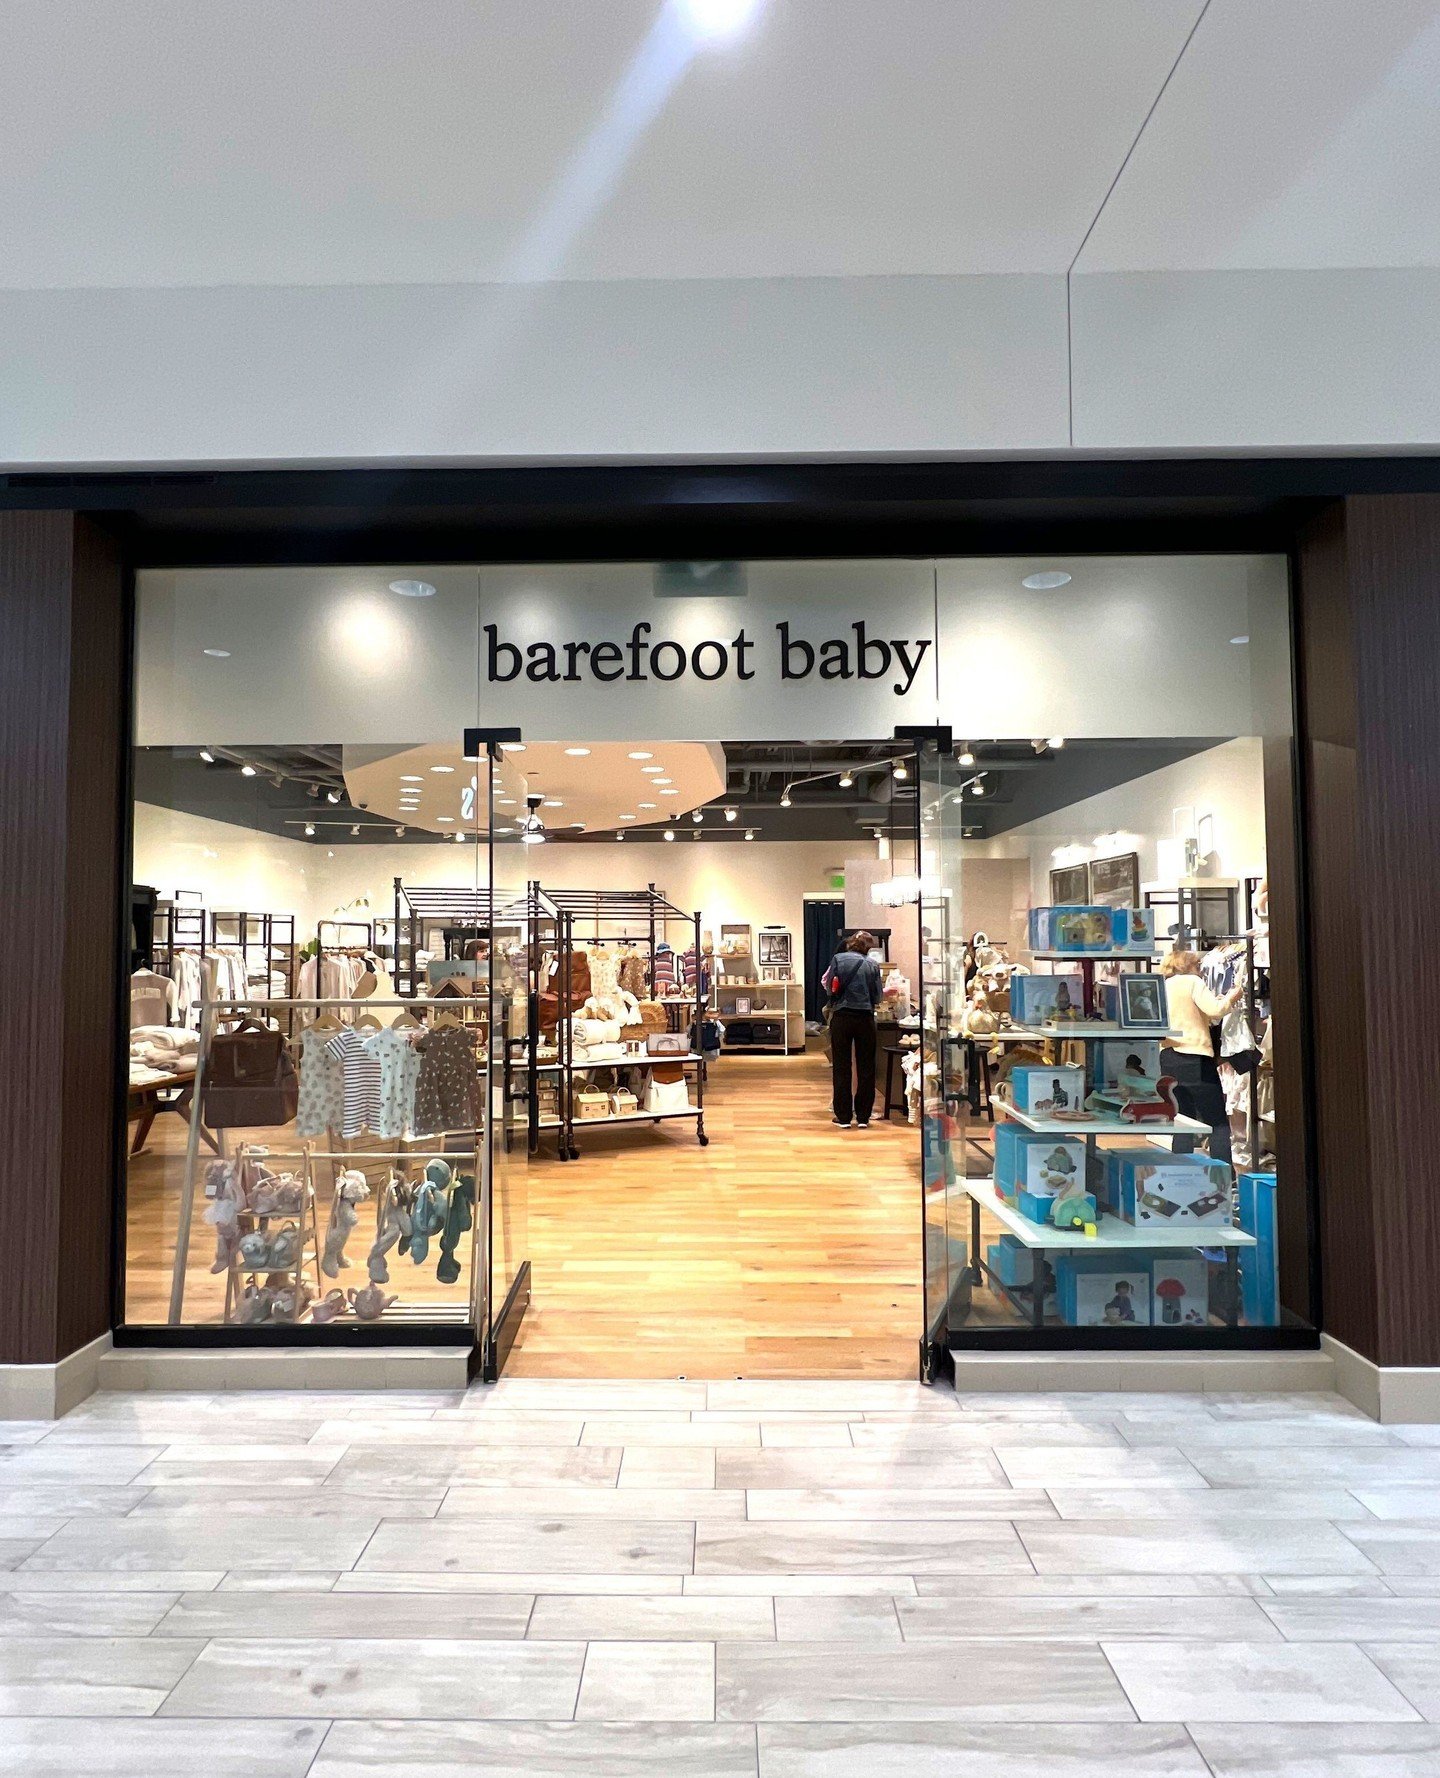 Happy opening day, @barefootbabygalleria! ✨ This heart-warming boutique features apparel, d&eacute;cor, toy collections and more for you and your kiddos to love. It's your one-stop-shop for all things chic, cute and oh-so cuddly! ⁠
⁠
Stop by this wee